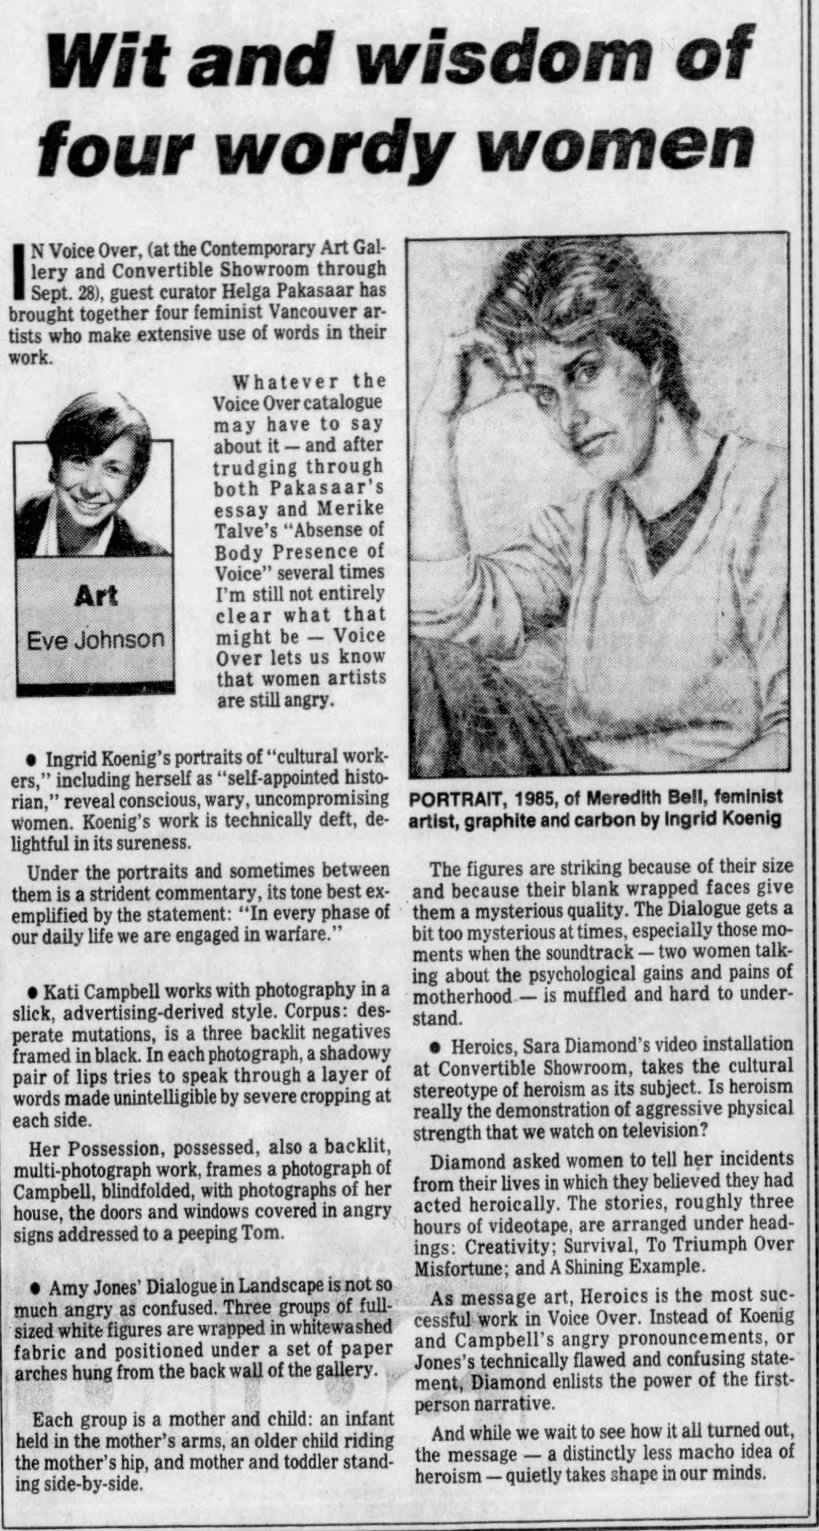 Johnson, Eve. Wit and wisdom of four wordy women. The Vancouver Sun . 18 Sep 1985. P 33.